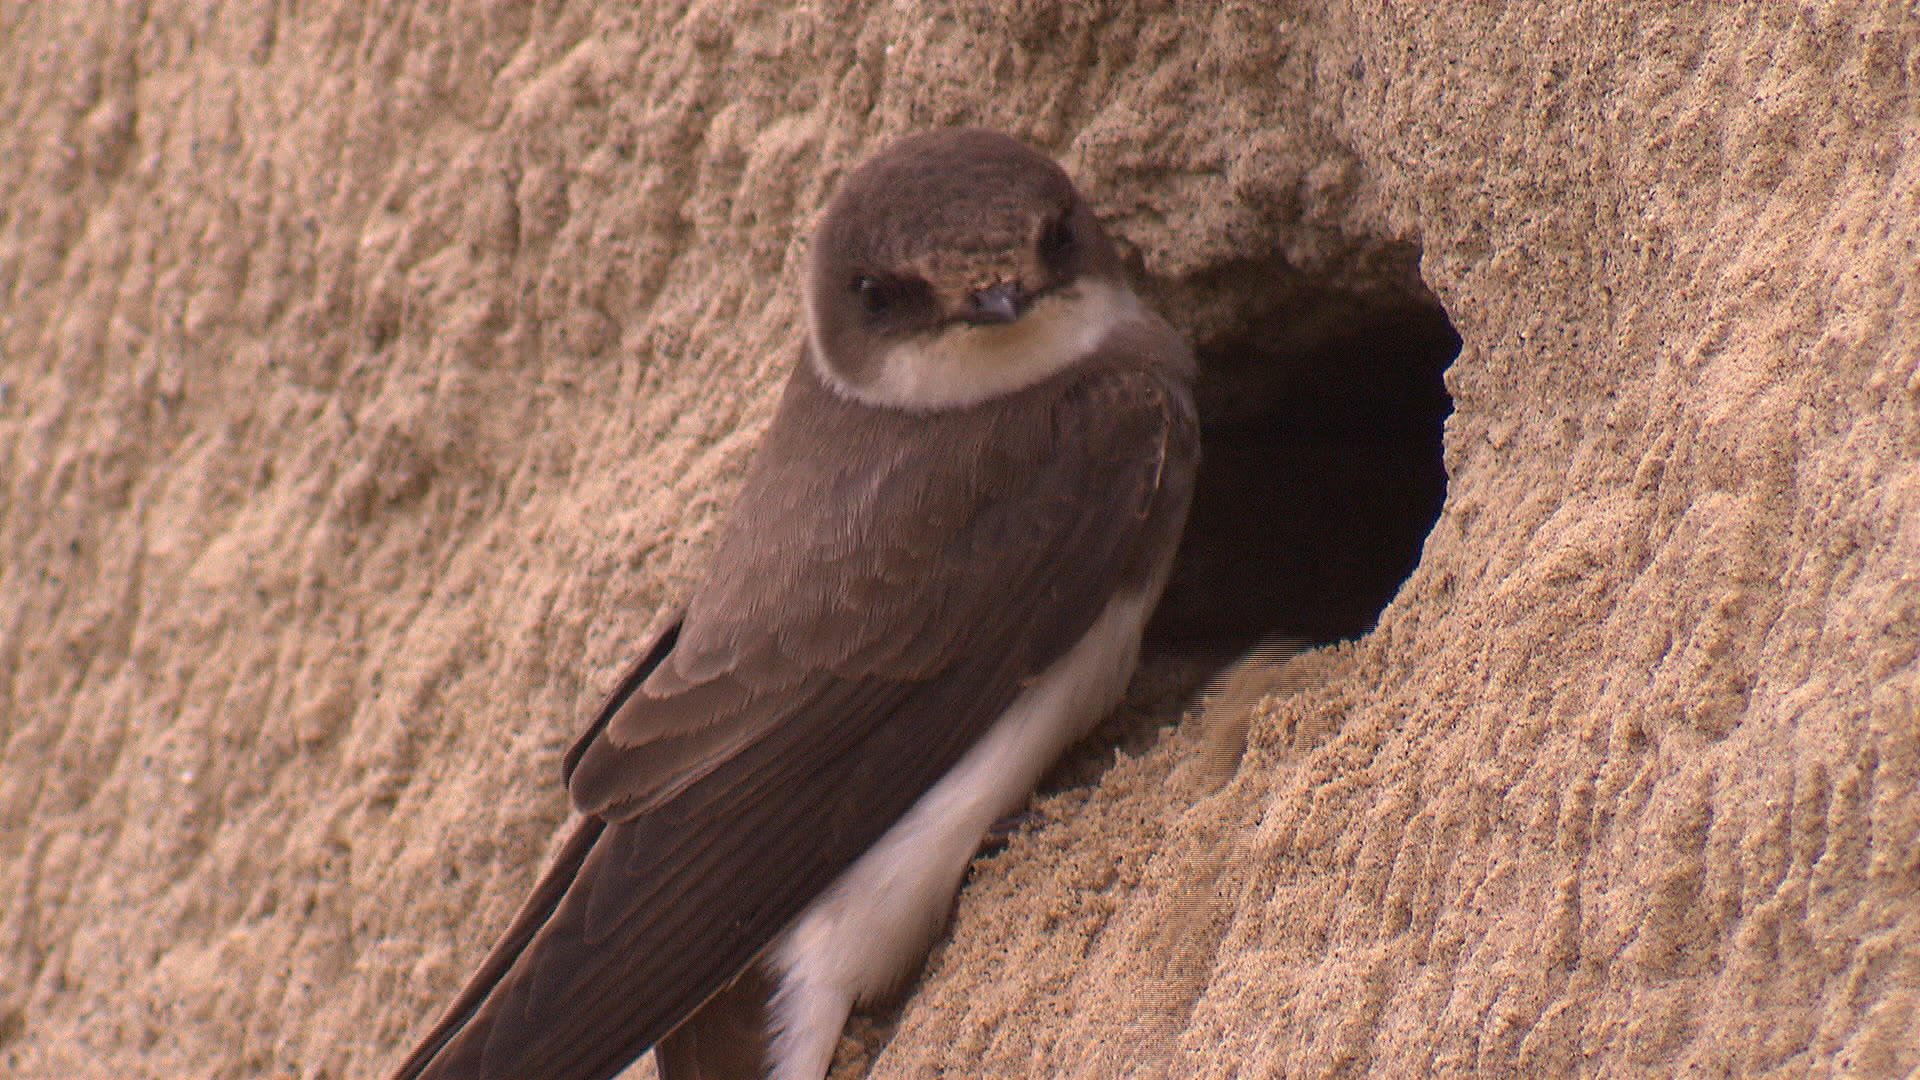 Swallow digging a hole in the sand